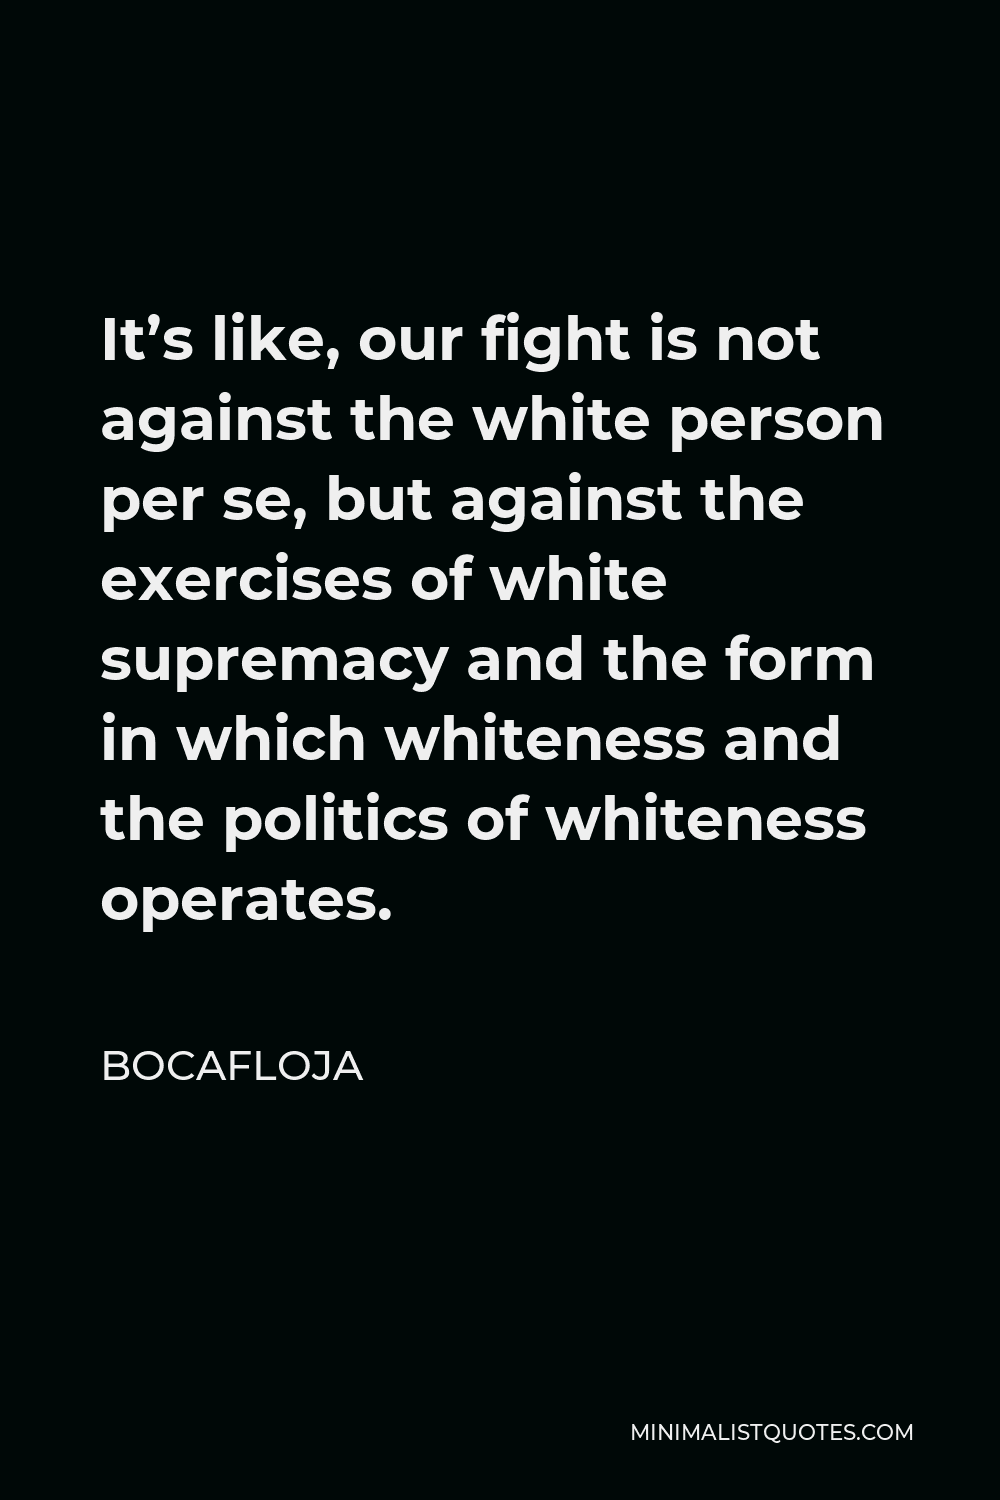 Bocafloja Quote - It’s like, our fight is not against the white person per se, but against the exercises of white supremacy and the form in which whiteness and the politics of whiteness operates.